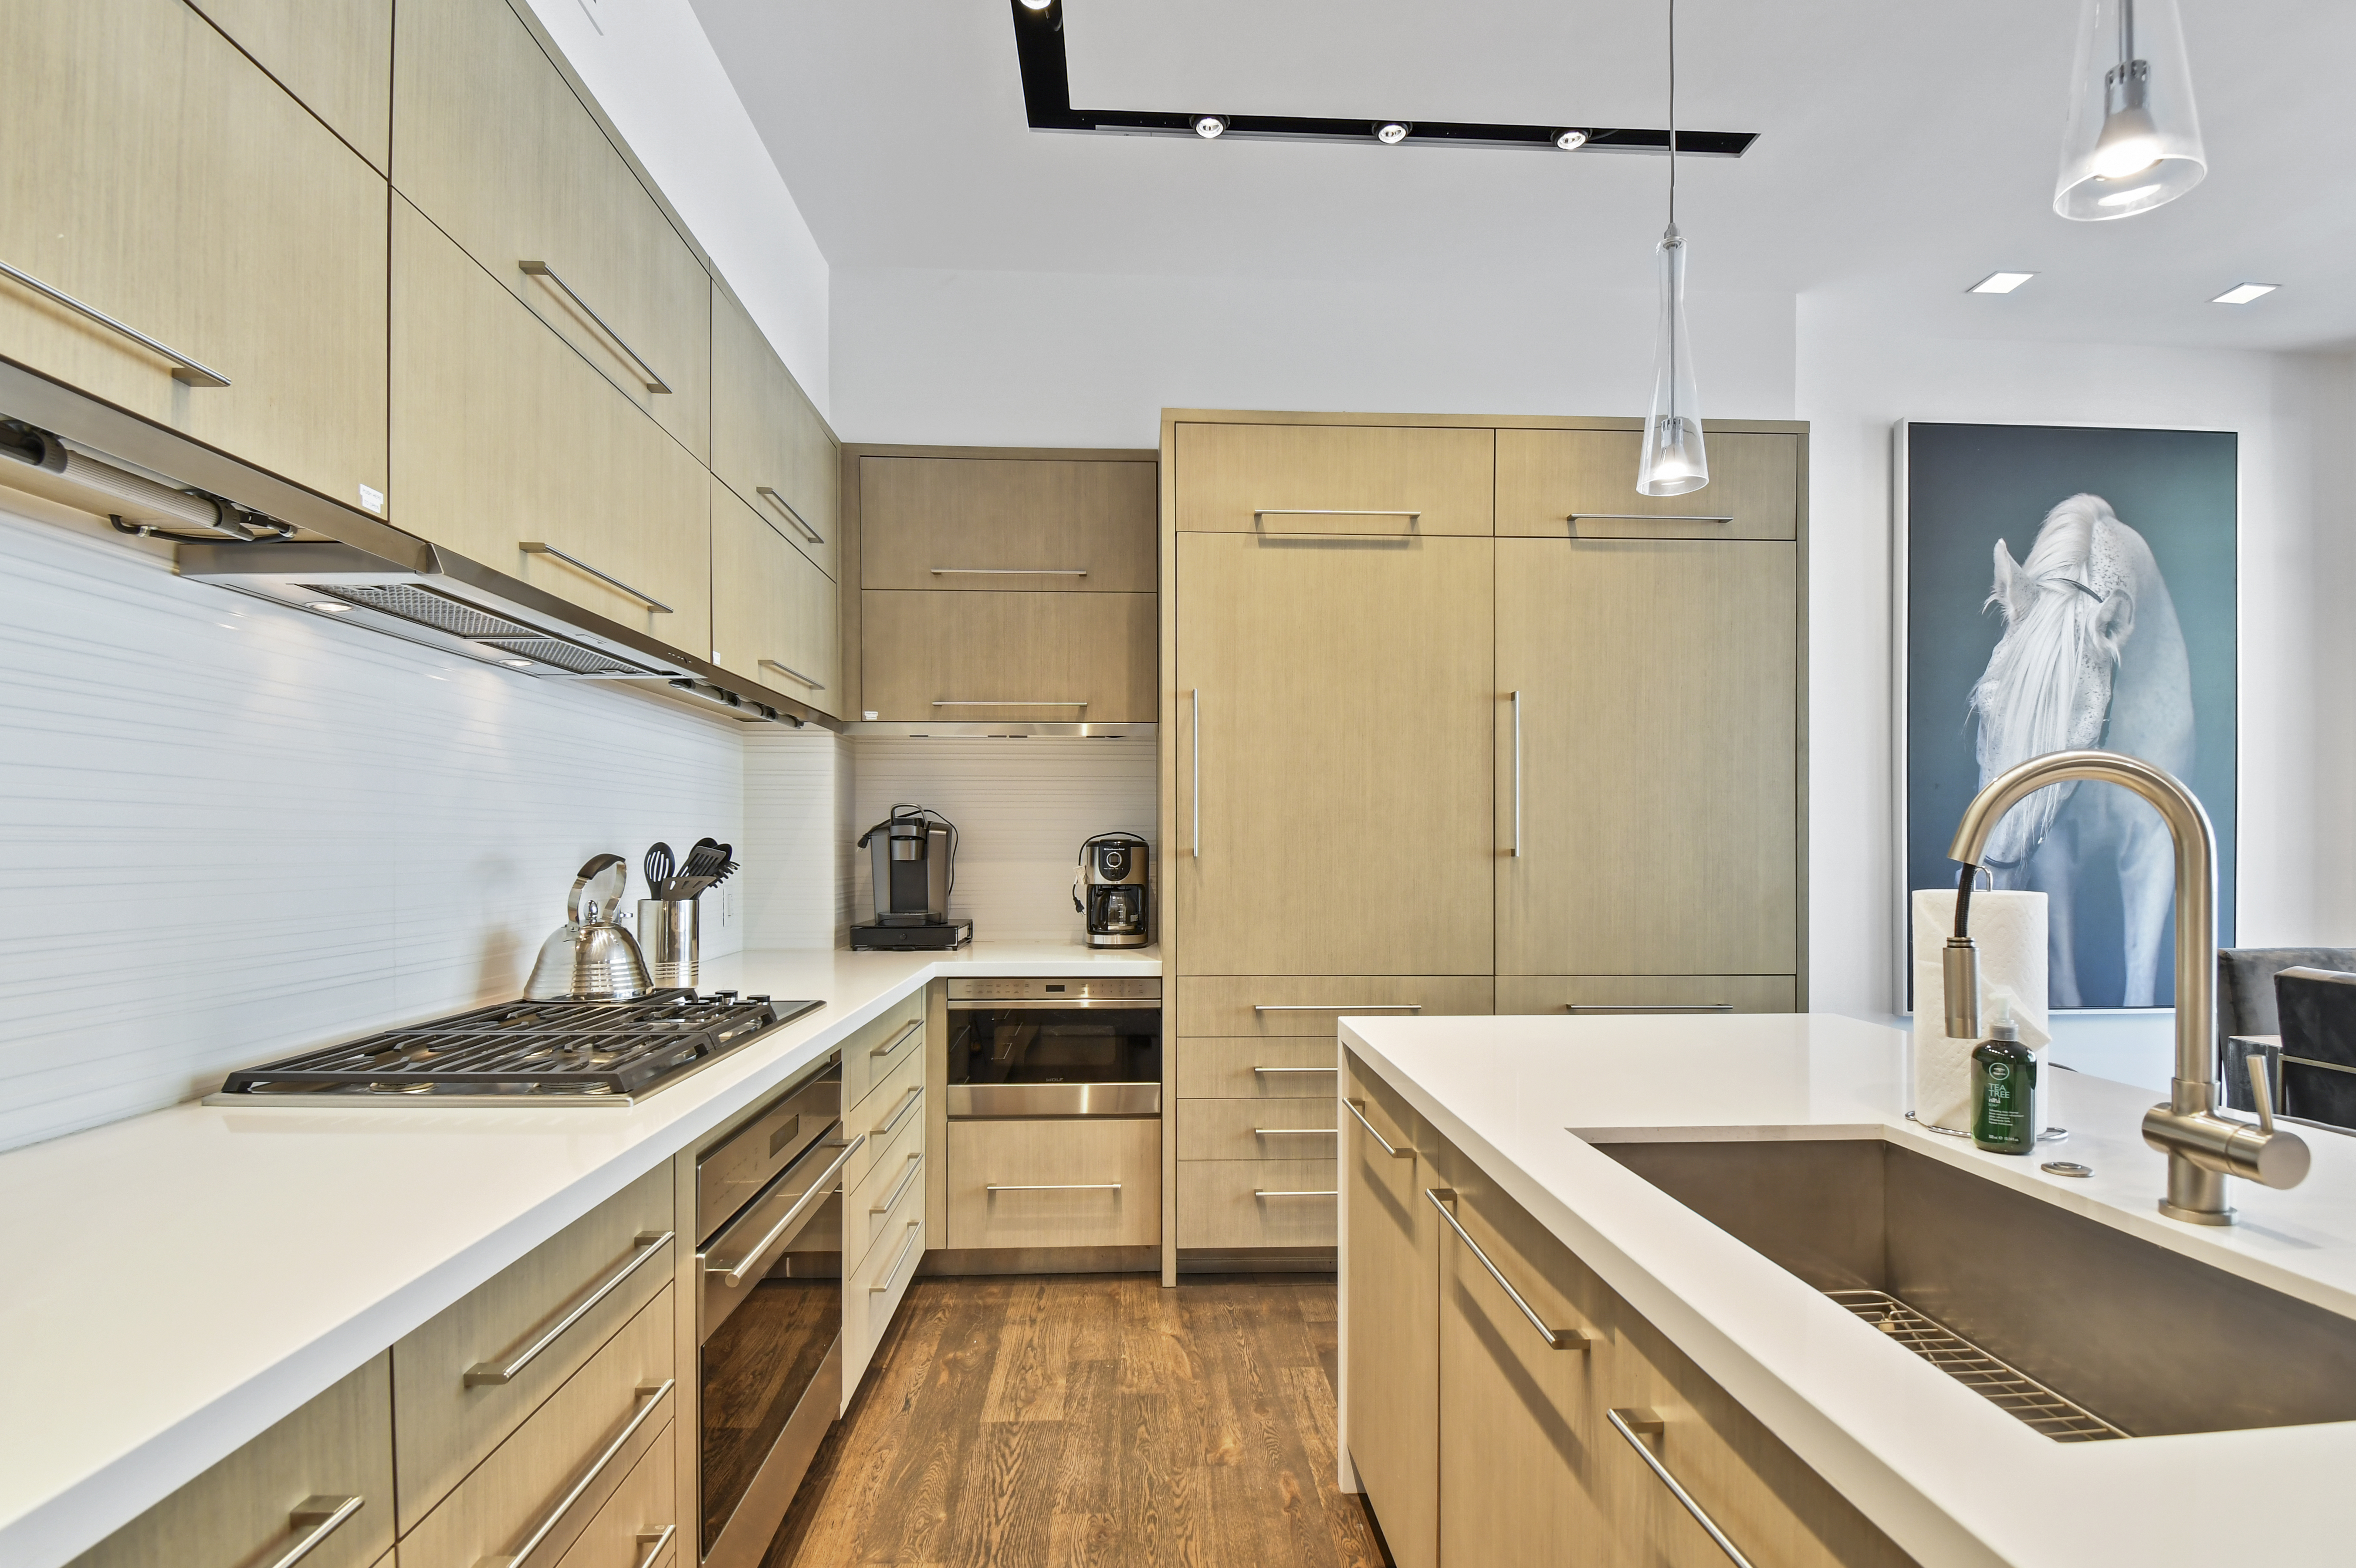 Sleek and modern finishes in the fully stocked kitchen.